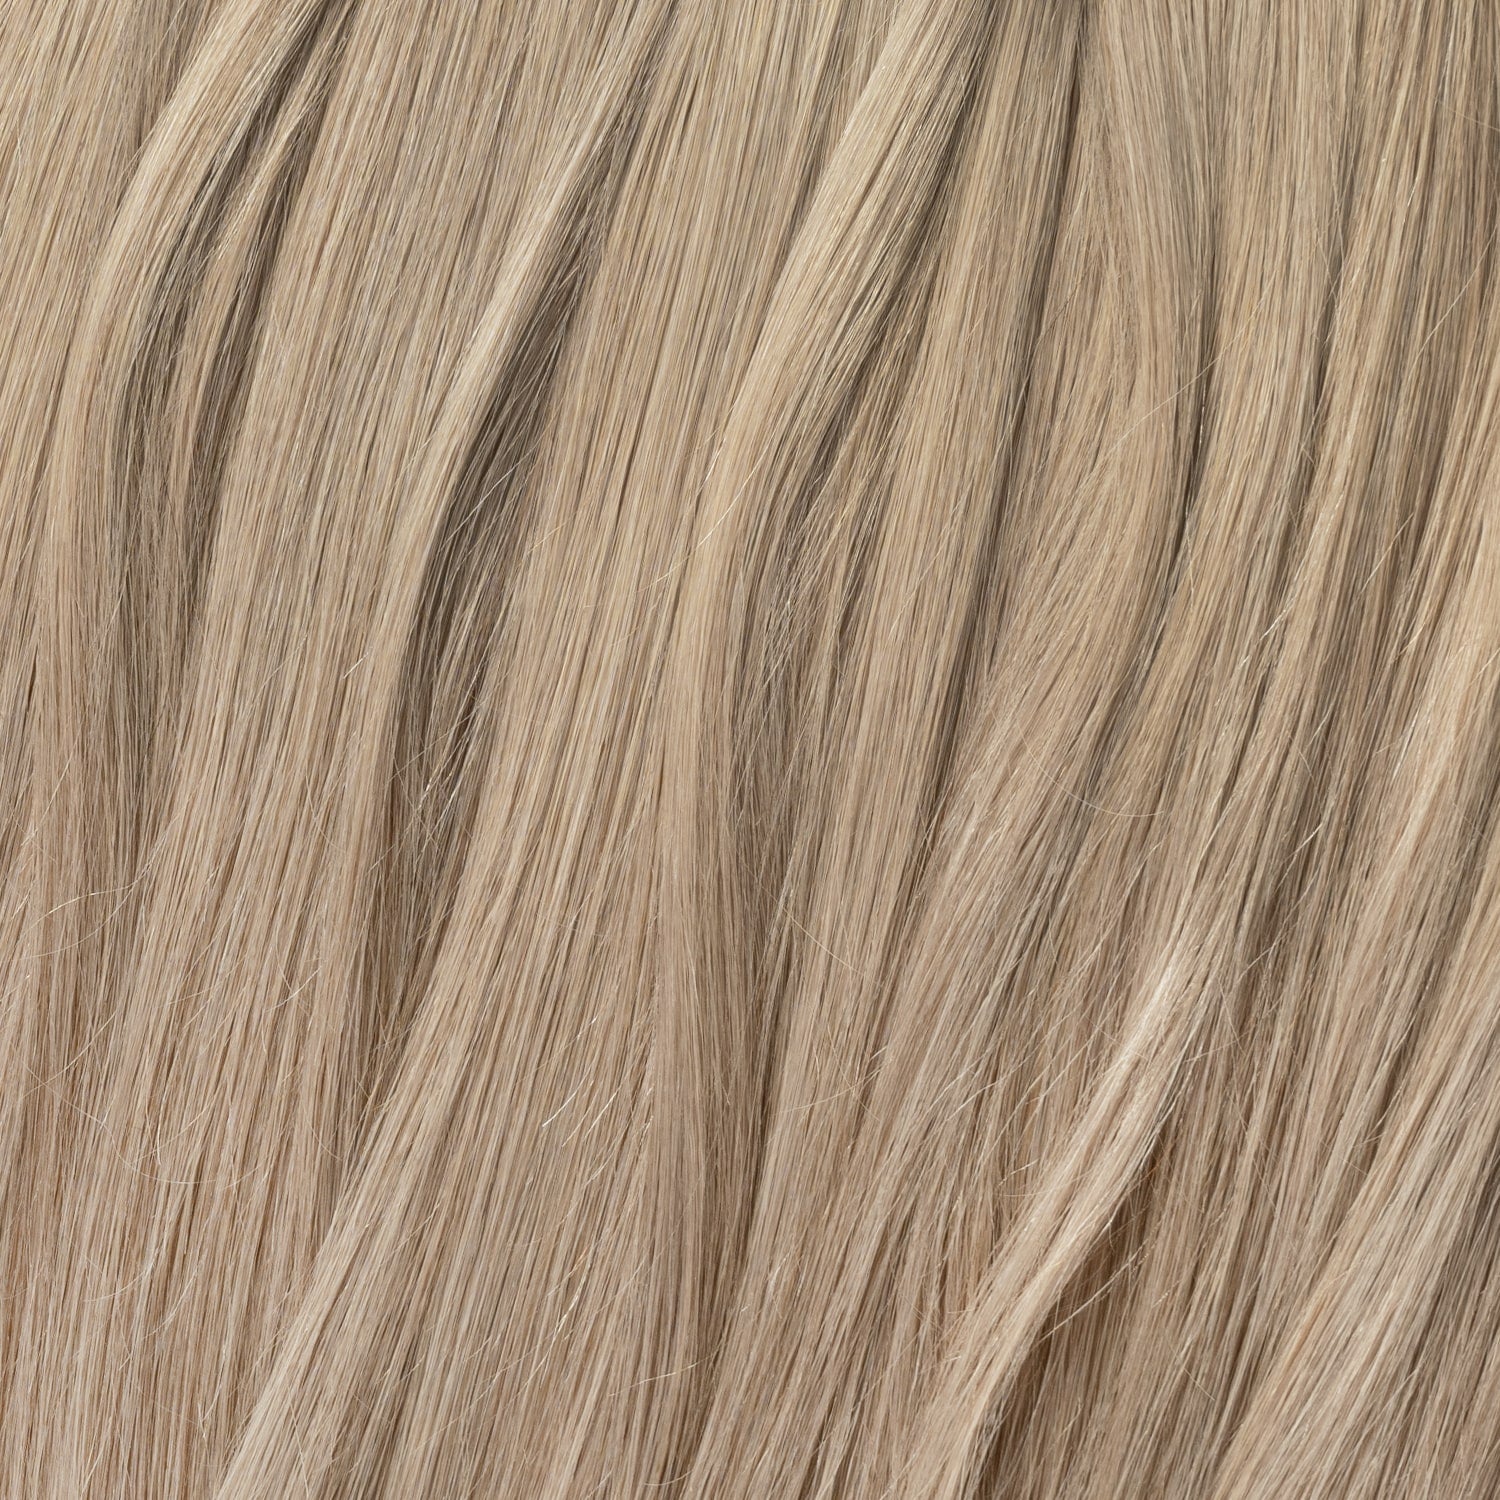 Halo hair extensions - Ash Blonde 17B